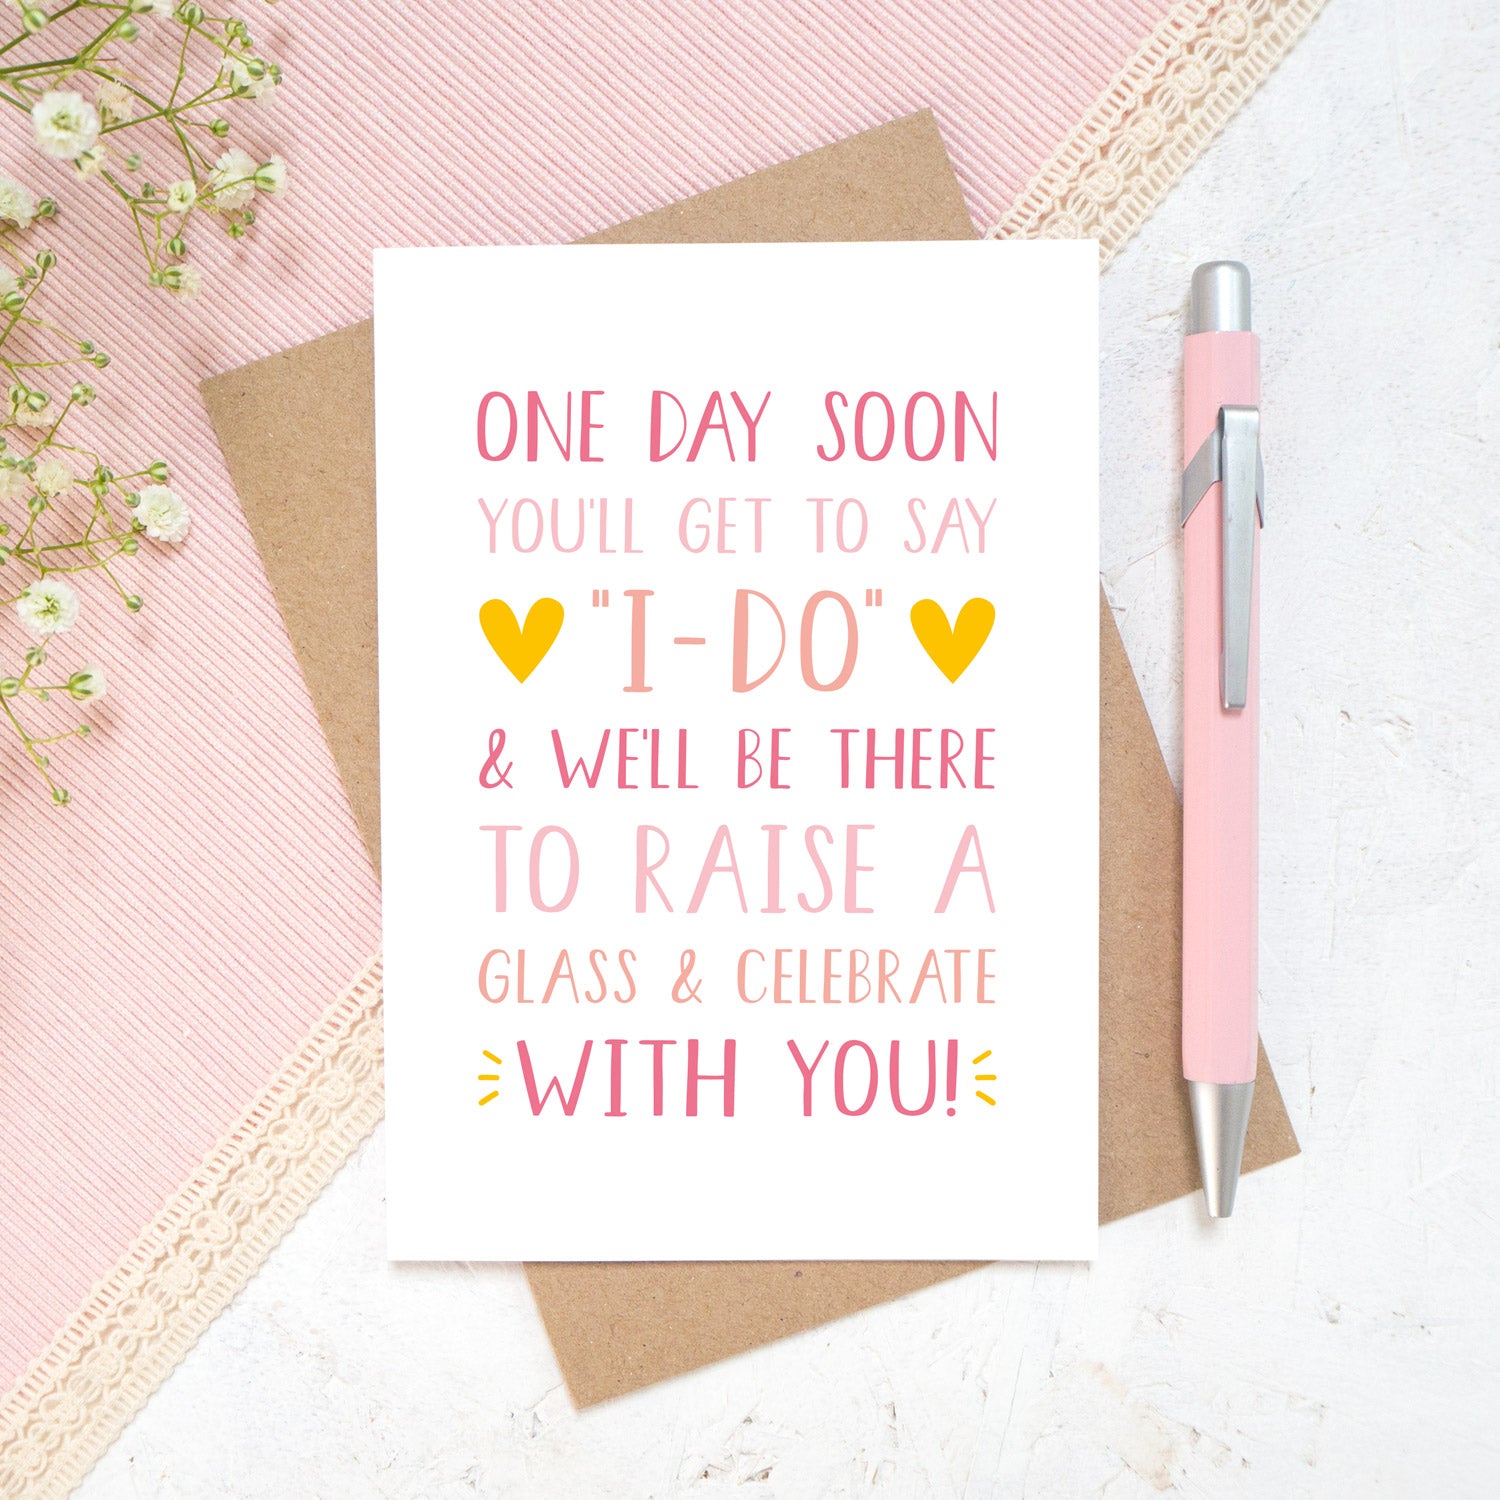 One day soon postponed wedding card in tones of pink. Photographed on a white and pink background with a hint of small flowers and a pen.